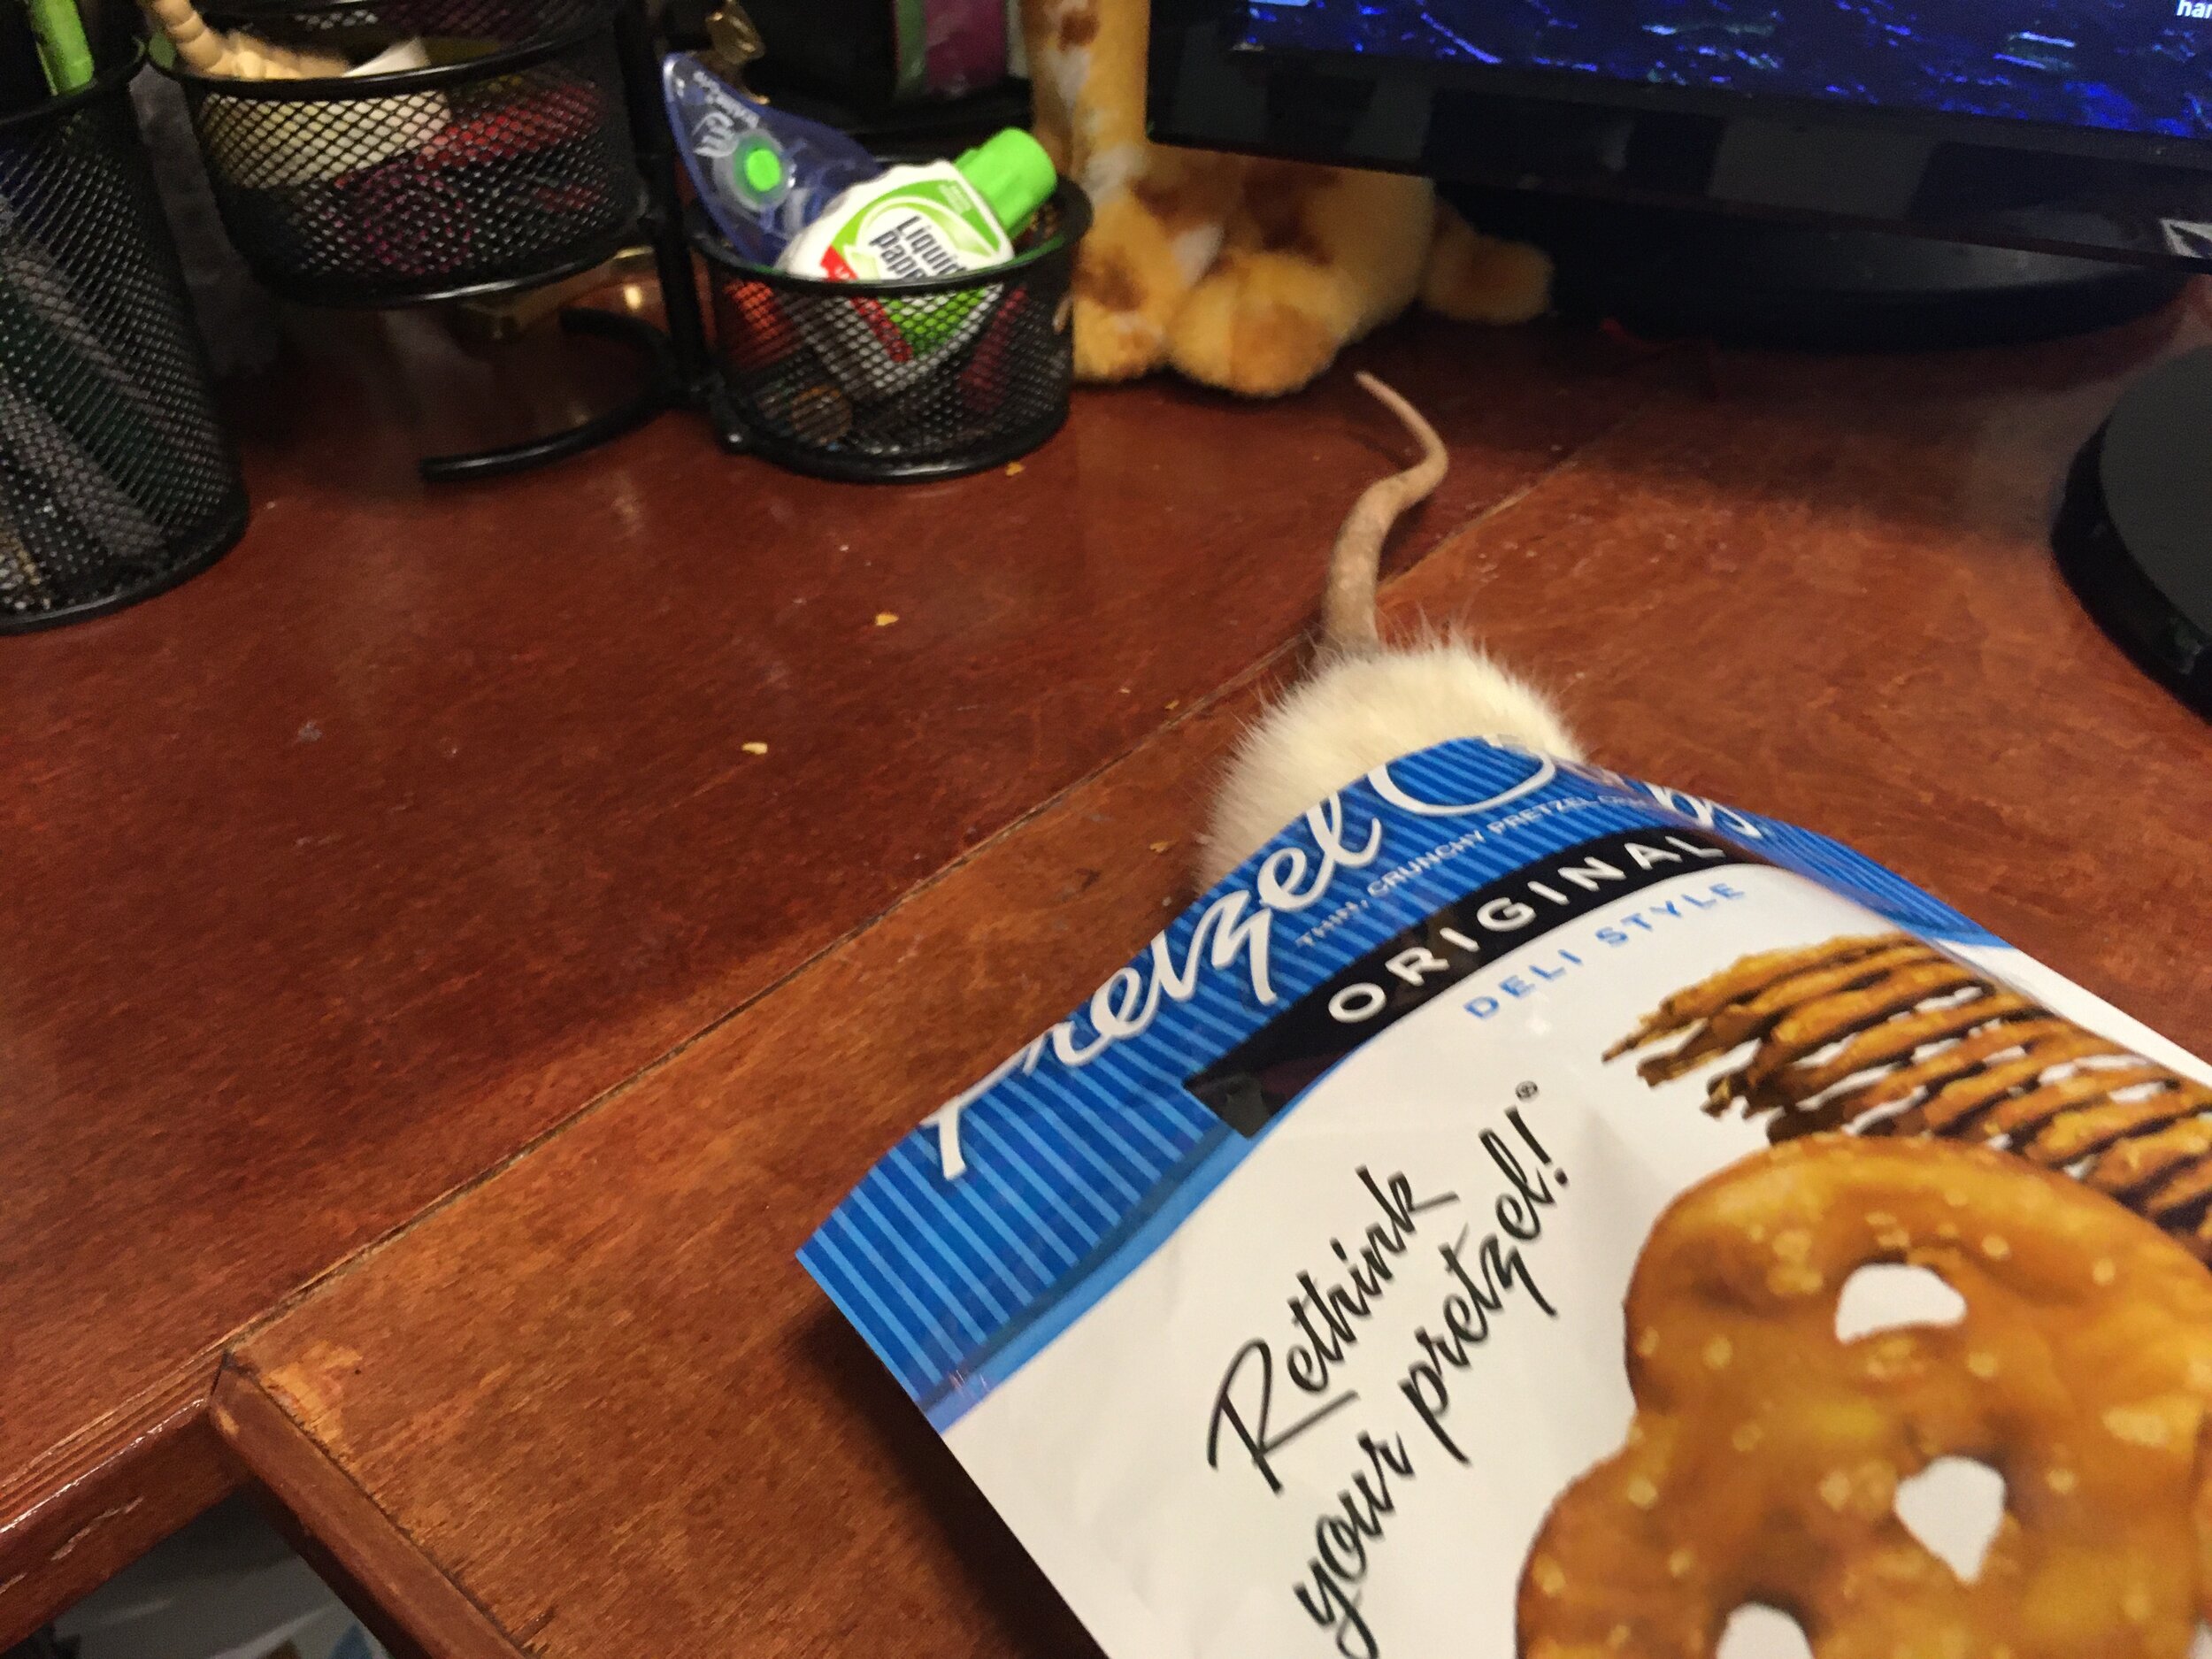 You didn't want these pretzels anymore, right?